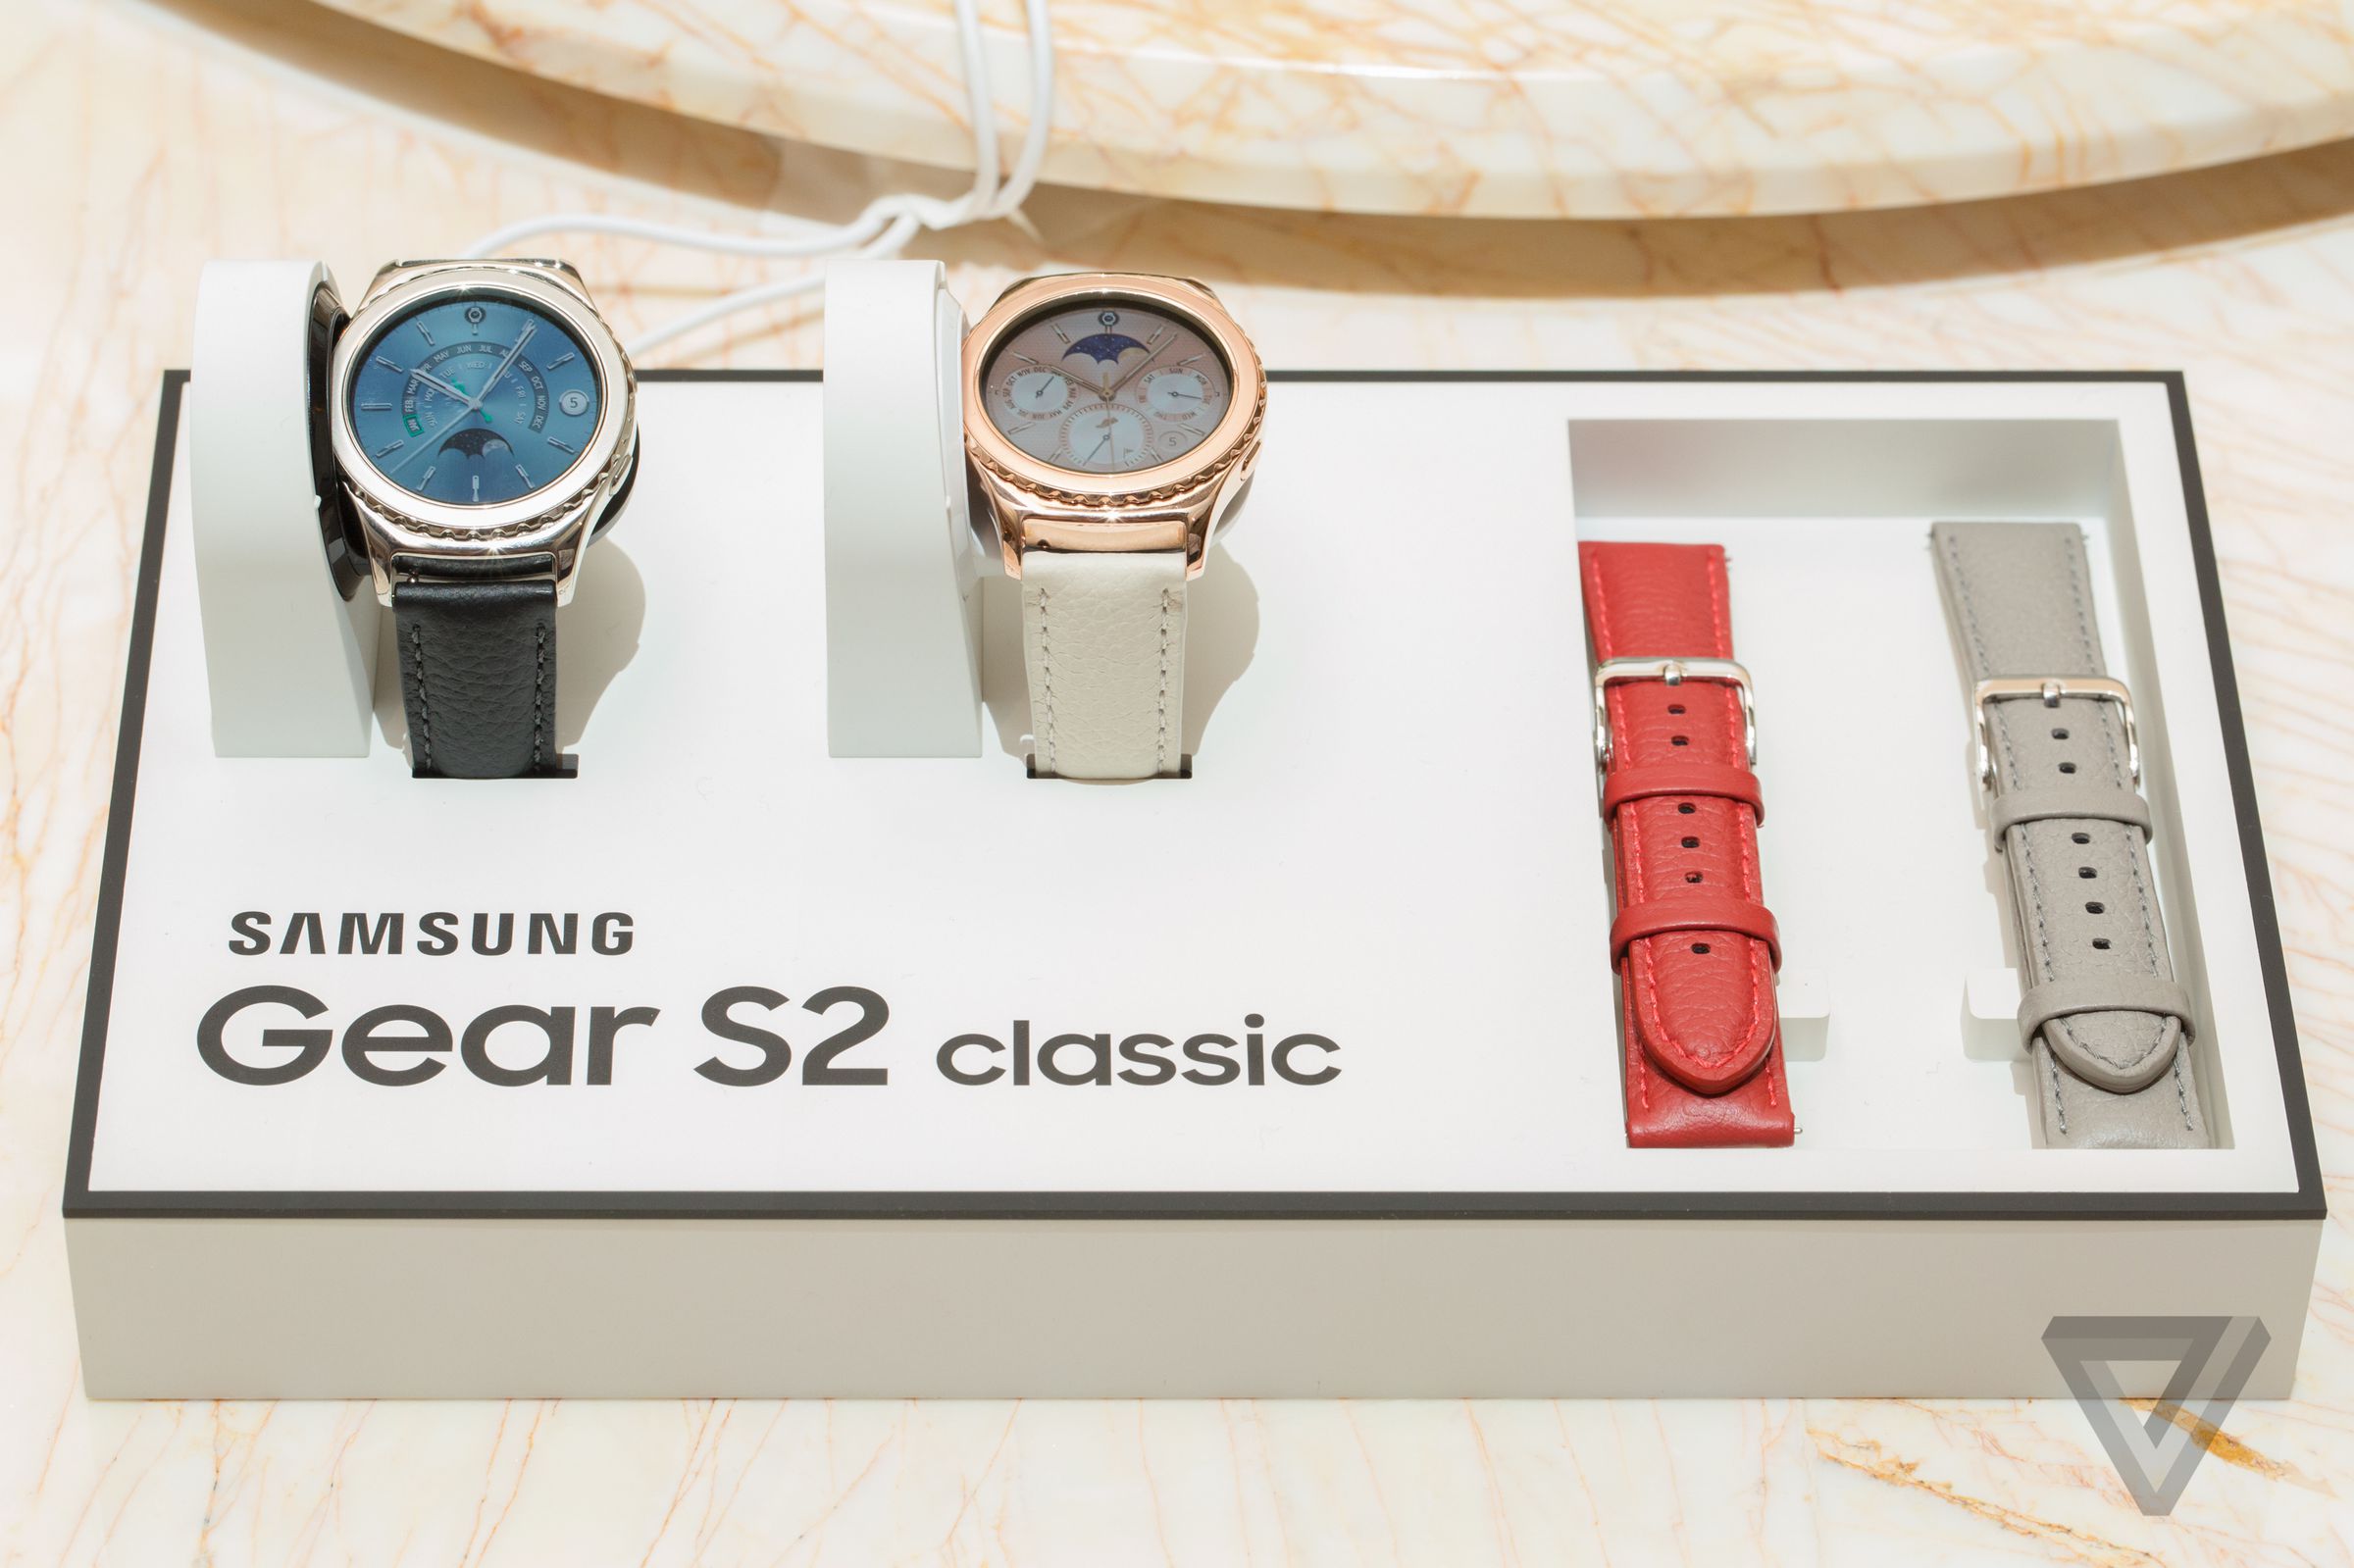 Samsung's gold and platinum Gear S2 Classic